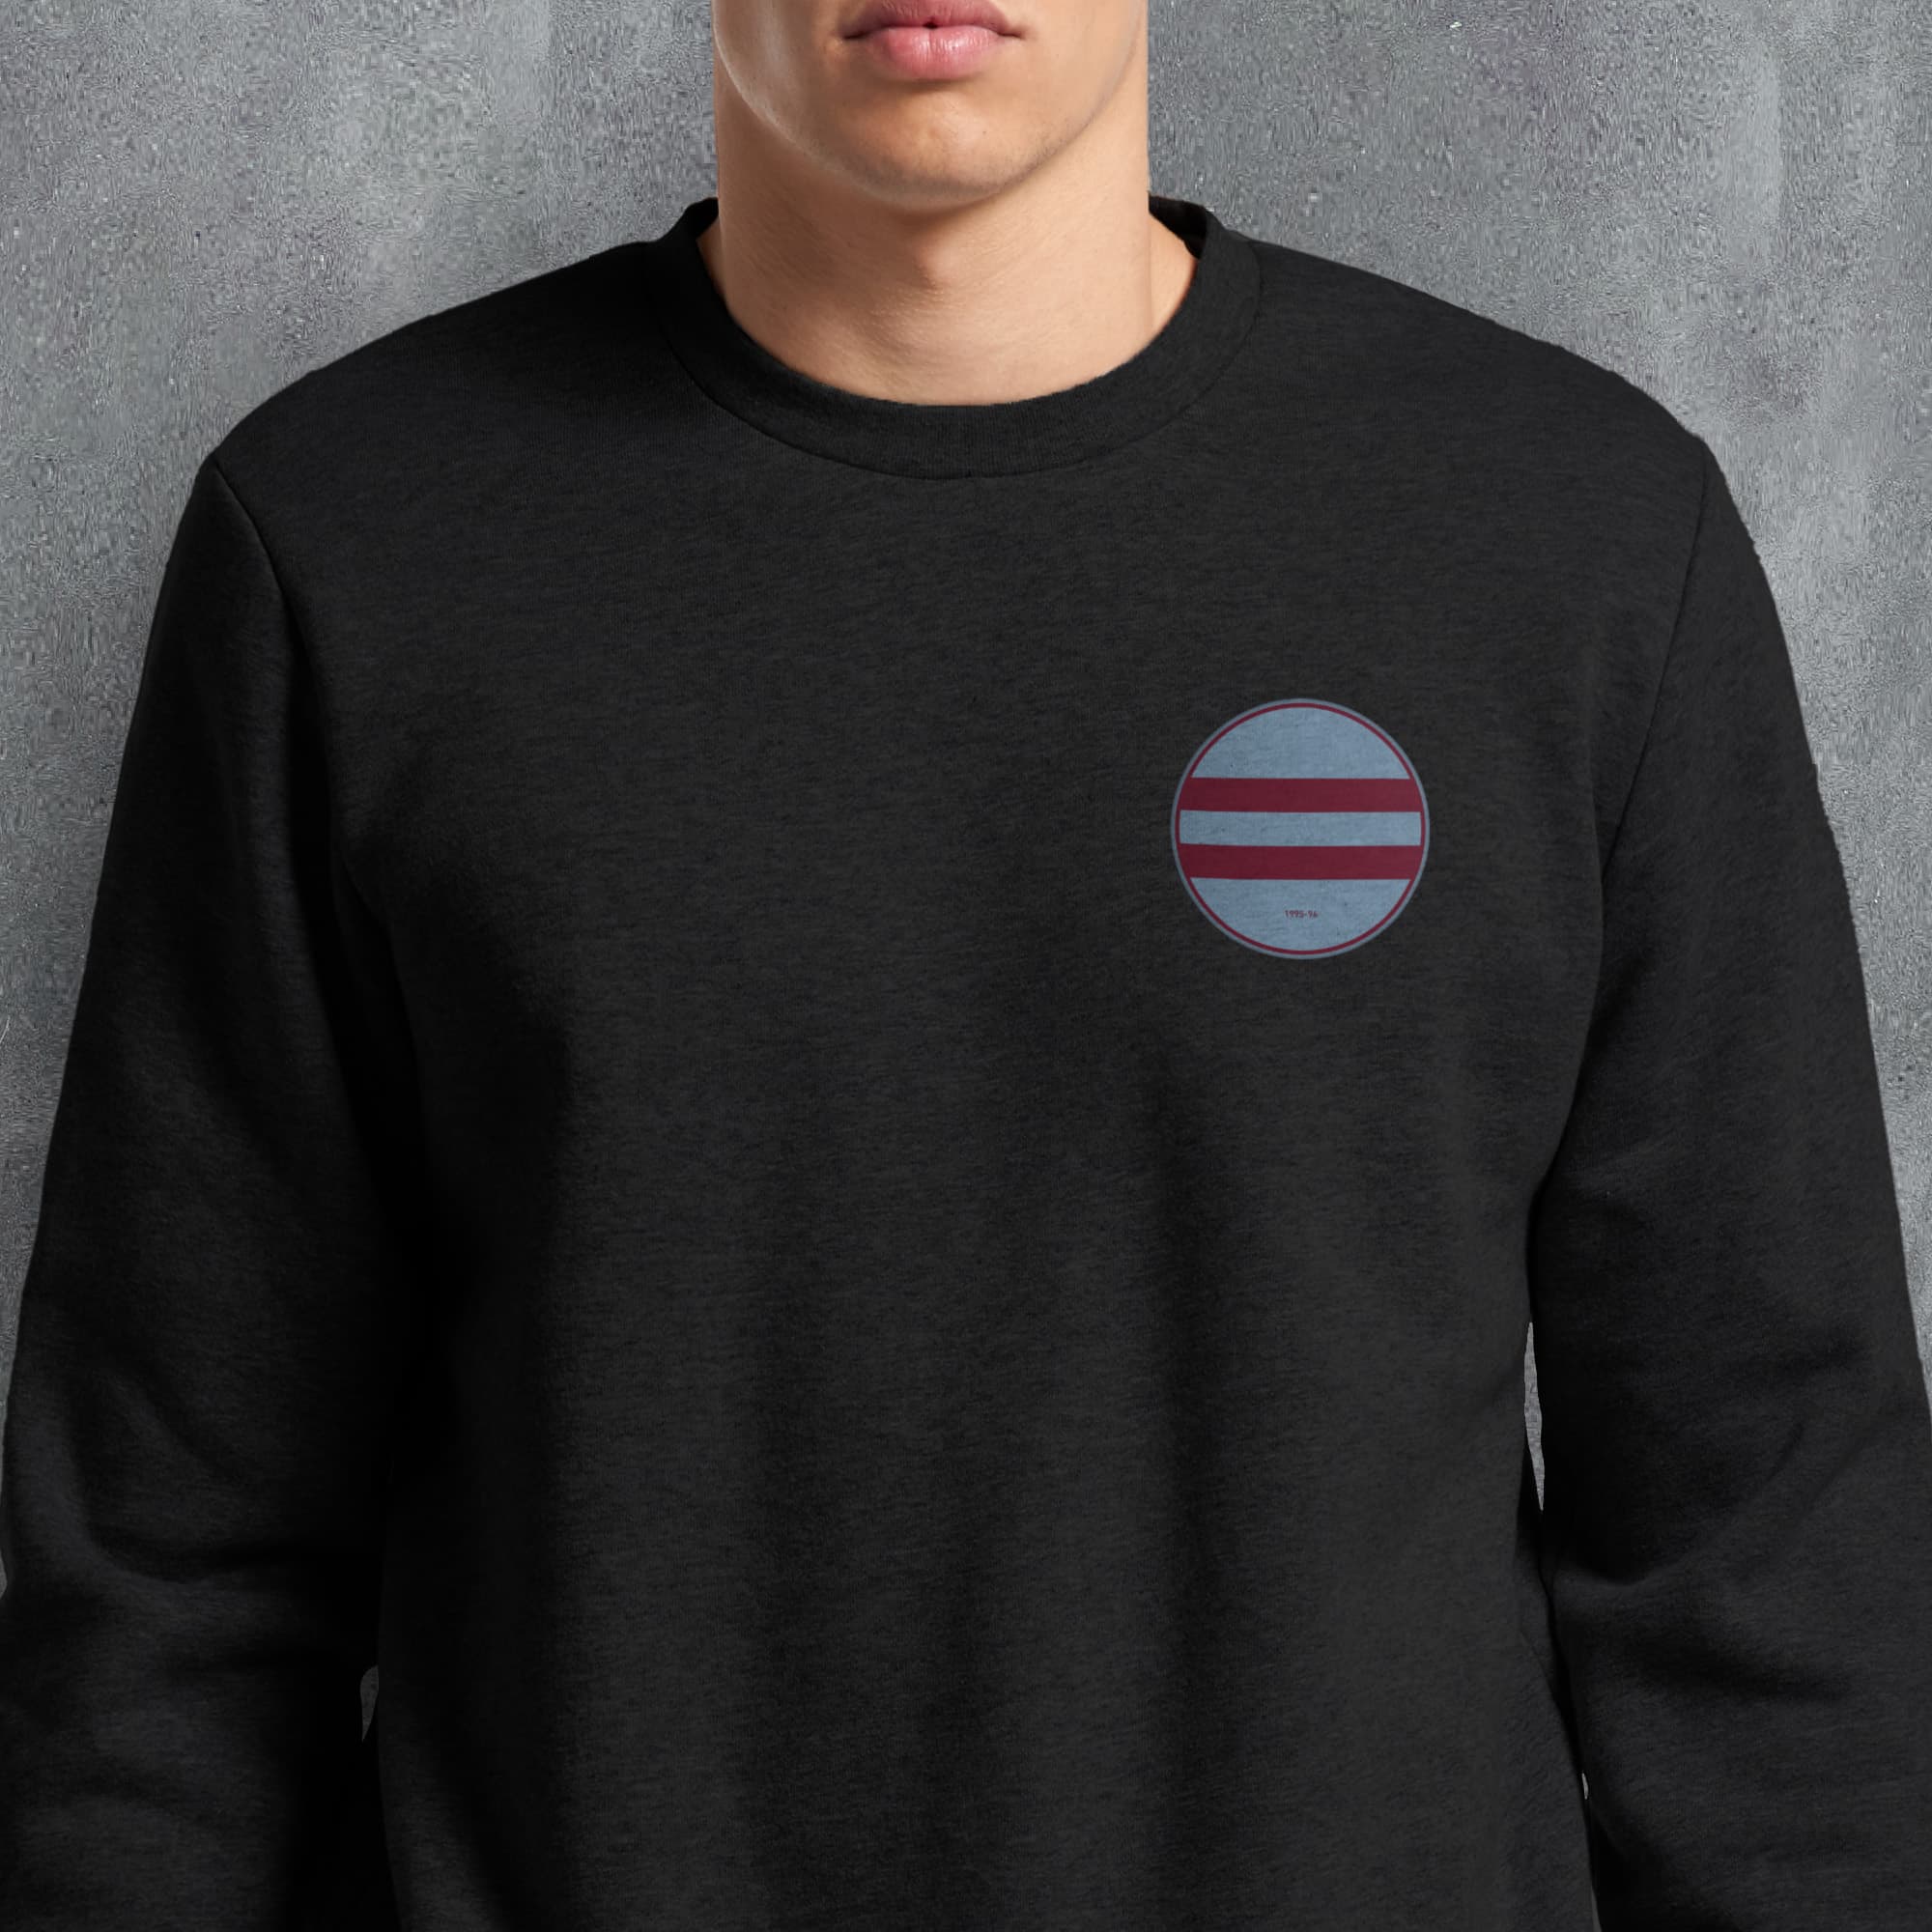 a man wearing a black sweatshirt with a red, white, and blue circle patch